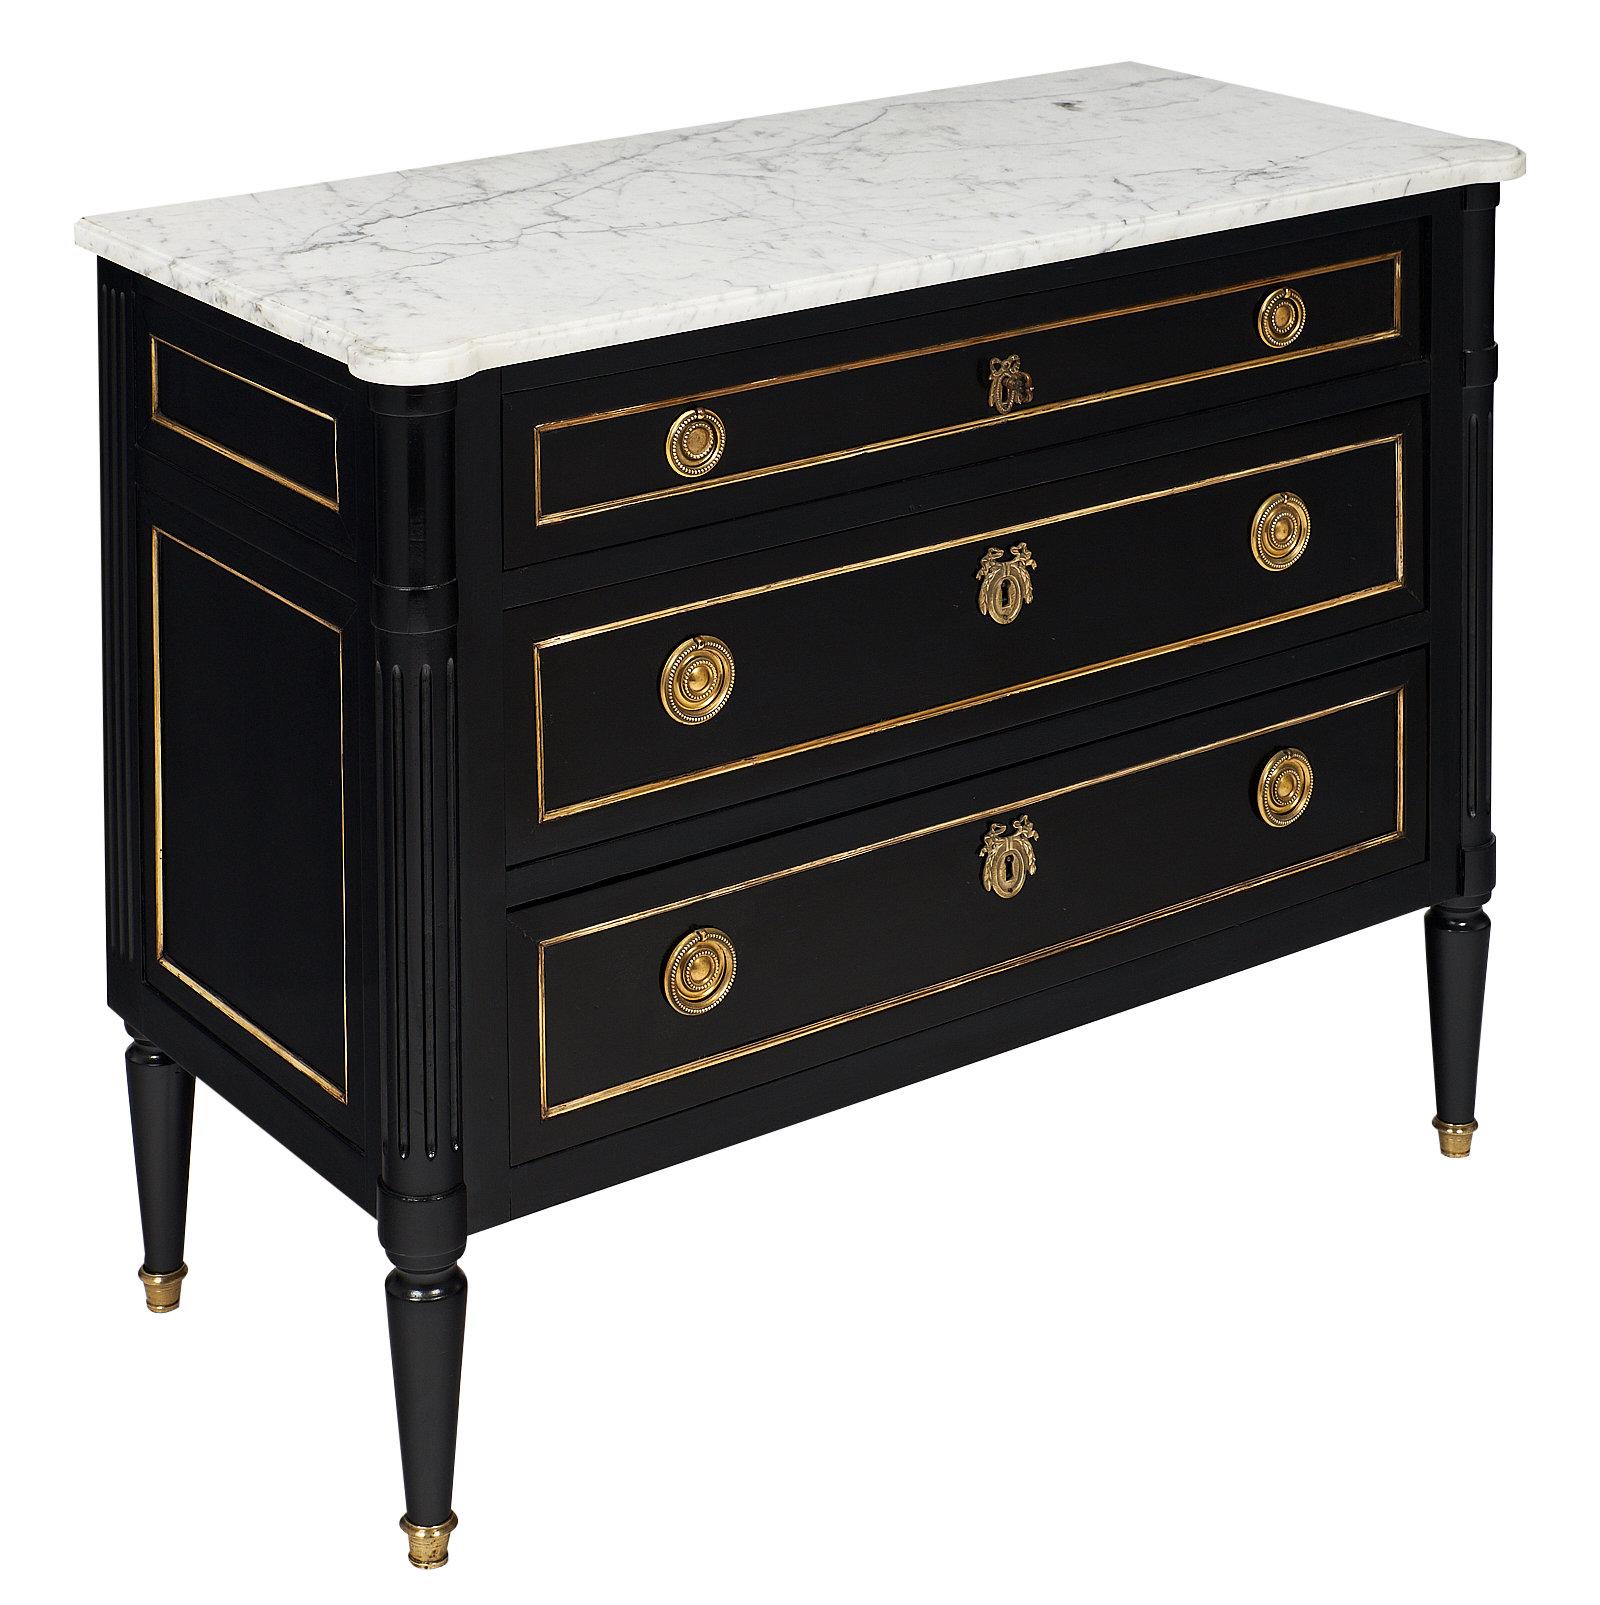 French Louis XVI style chest of drawers of mahogany, ebonized and finished with a lustrous French polish. This elegant “commode” features its original Carrara marble top, gilded brass hardware and trim.